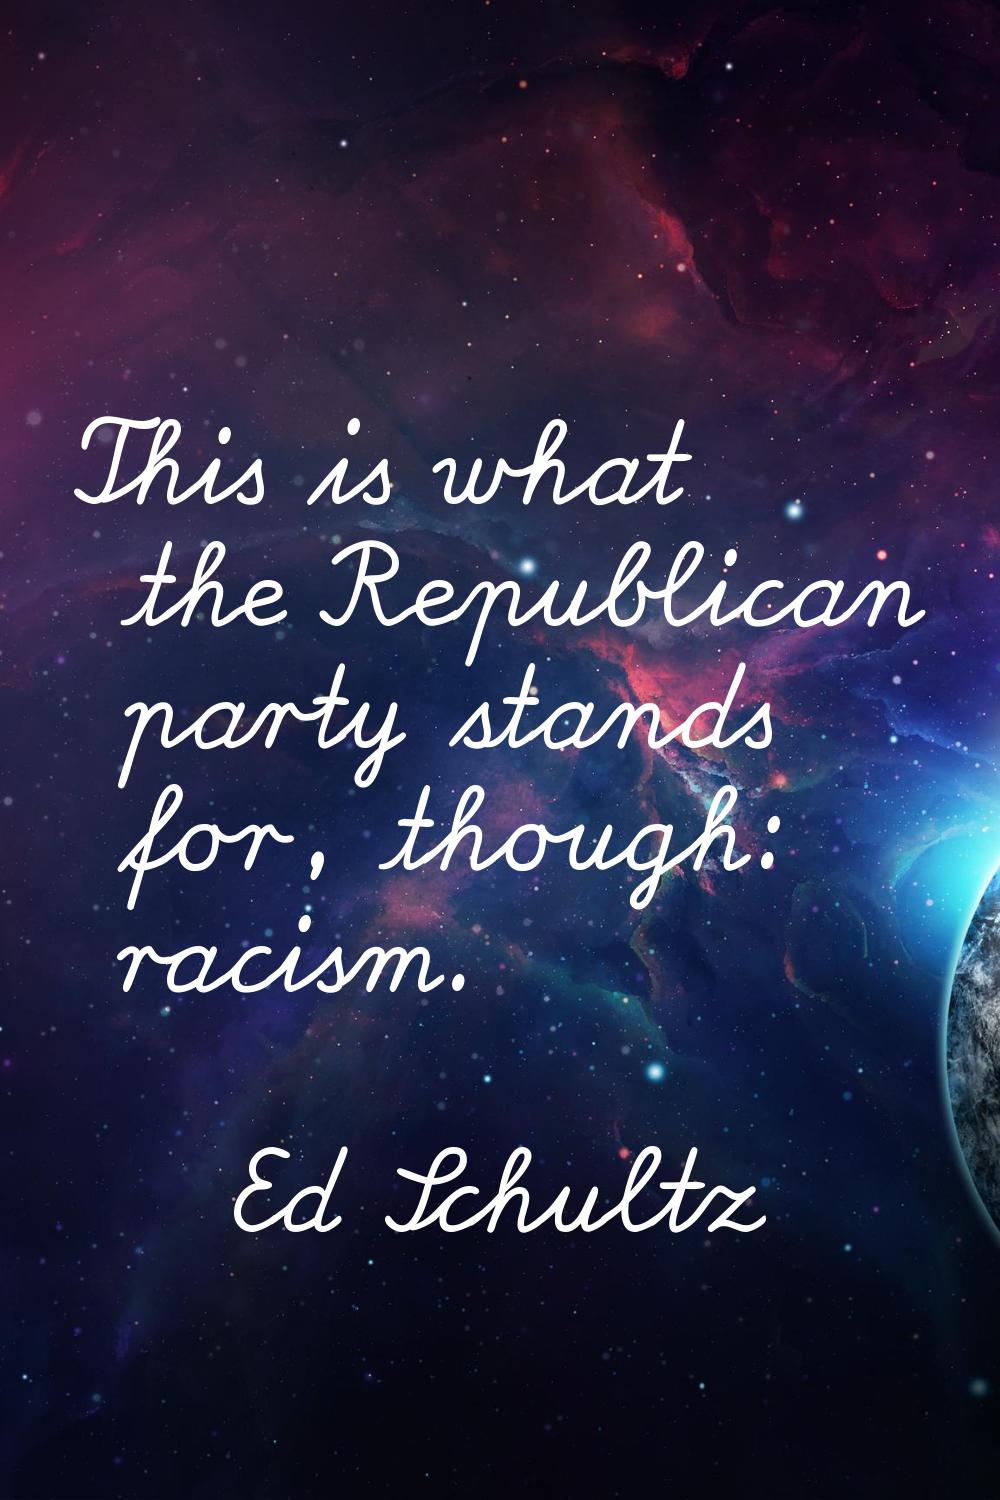 This is what the Republican party stands for, though: racism.